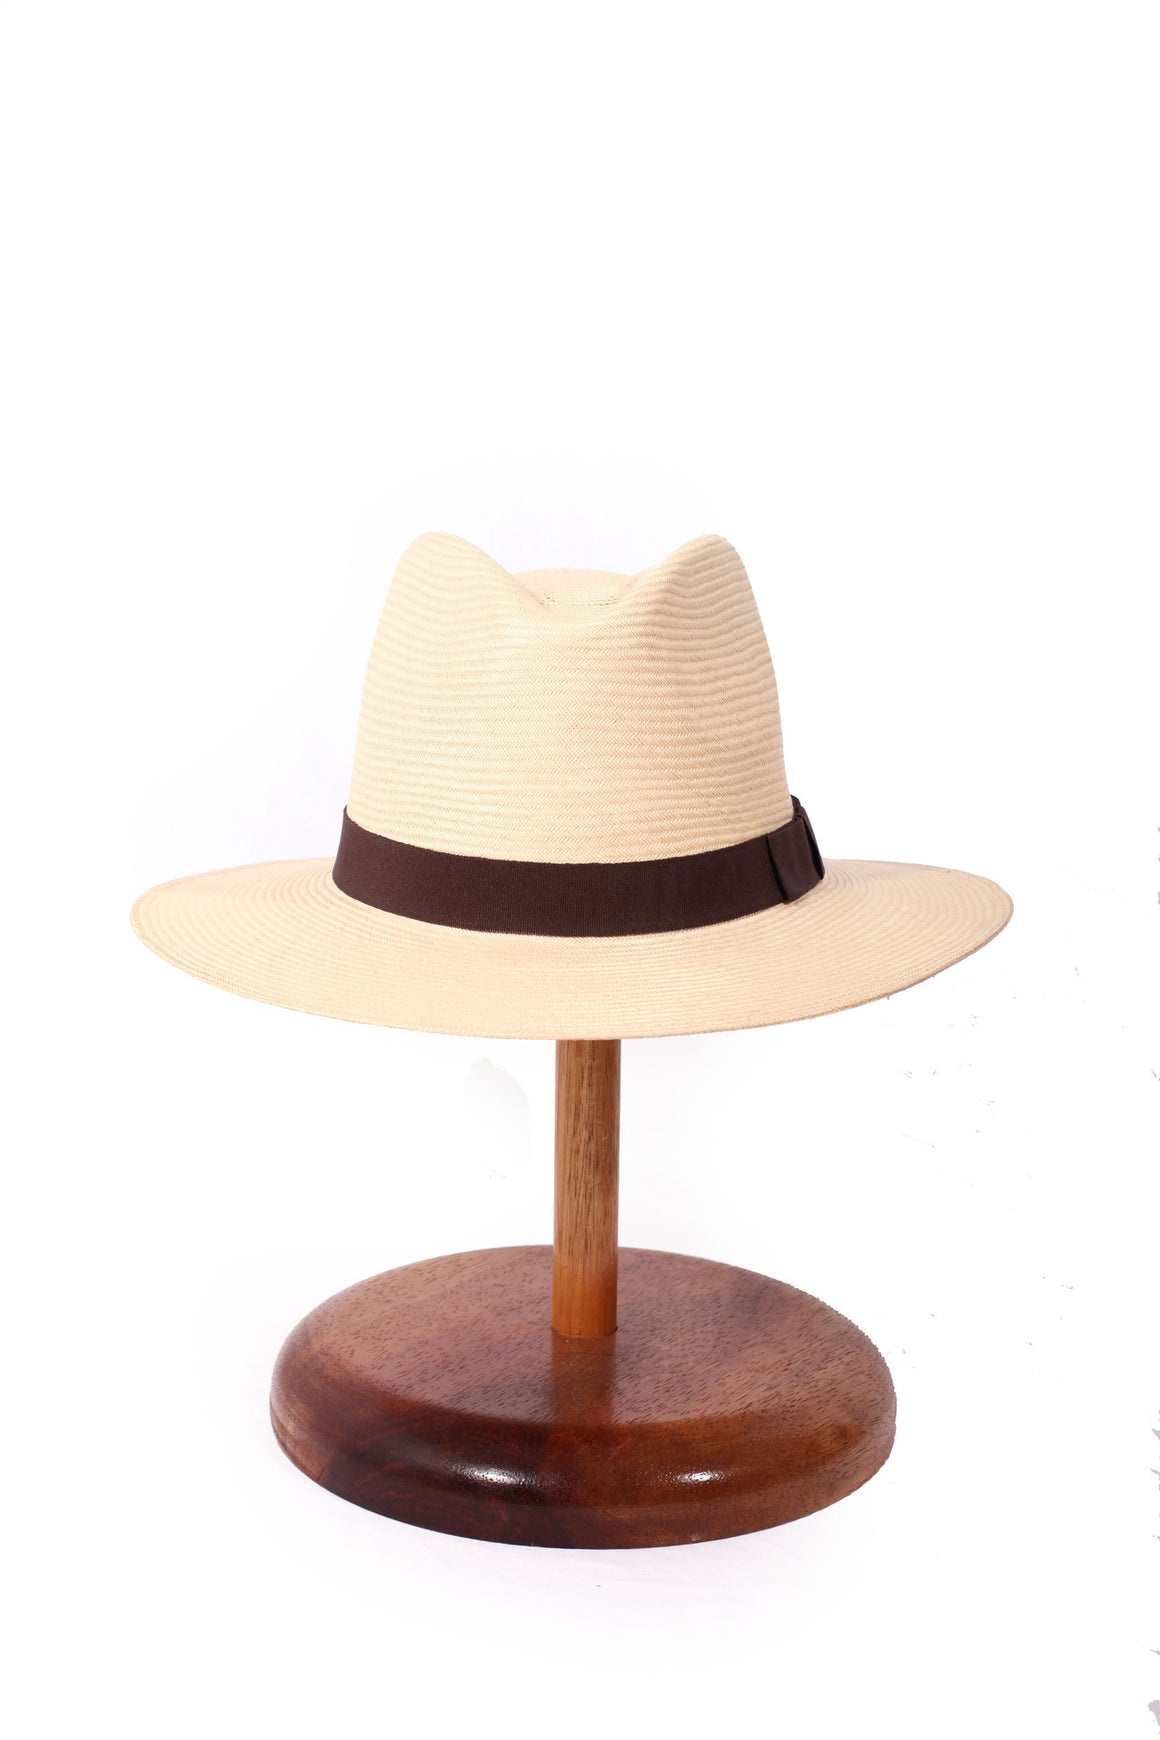 Maya Neumann Panama Style Hat (Brown Grosgrain Is Out Of Stock)